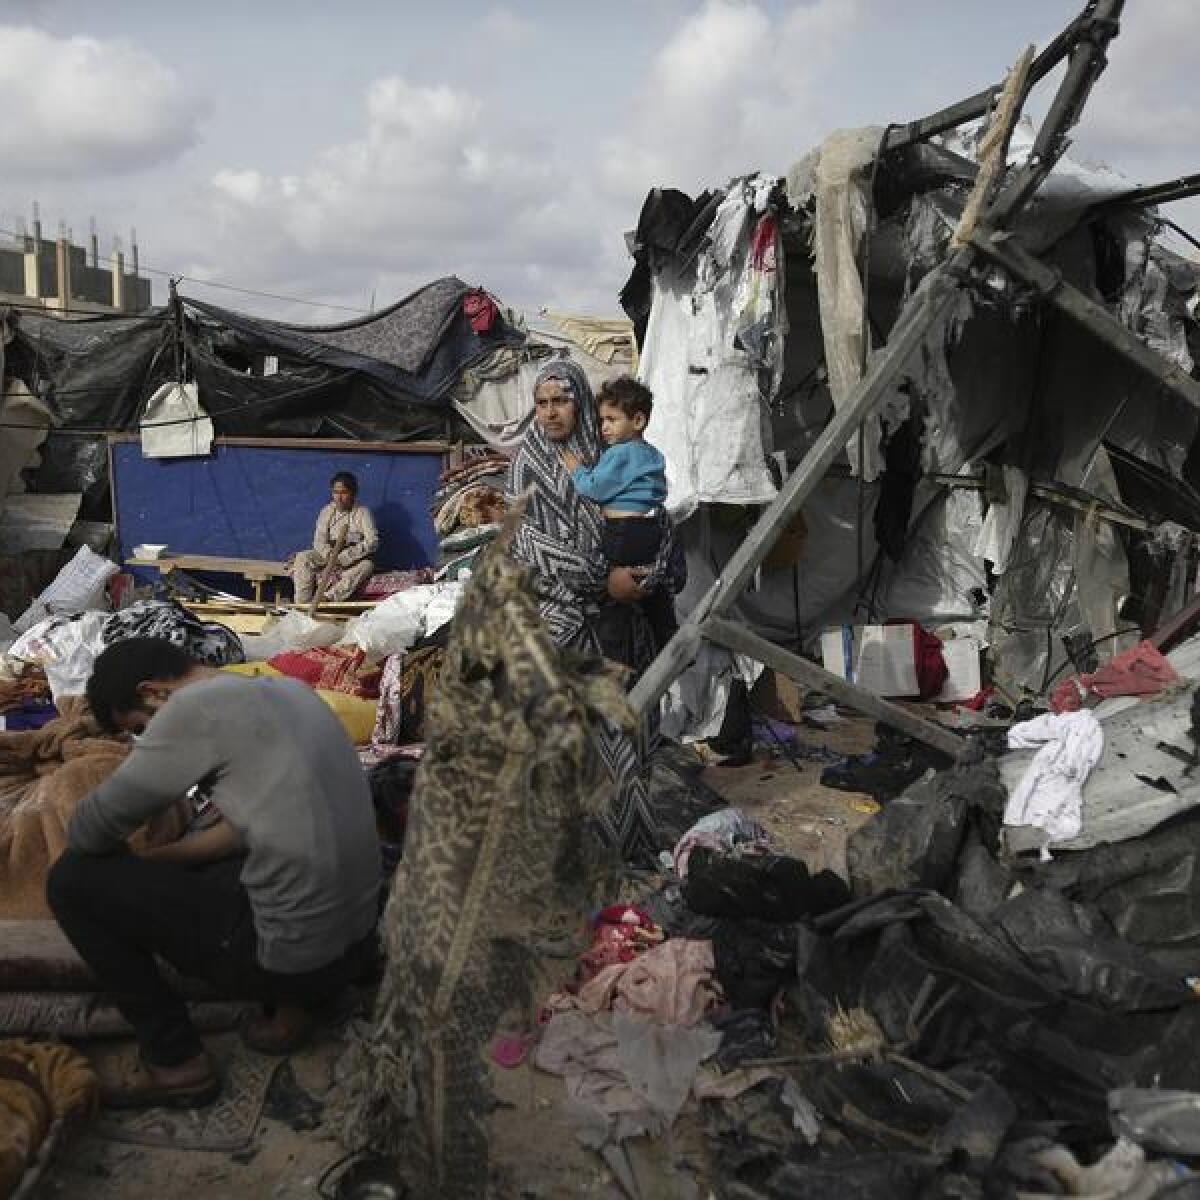 People in Gaza sit in the ruins of tents in which they were living.